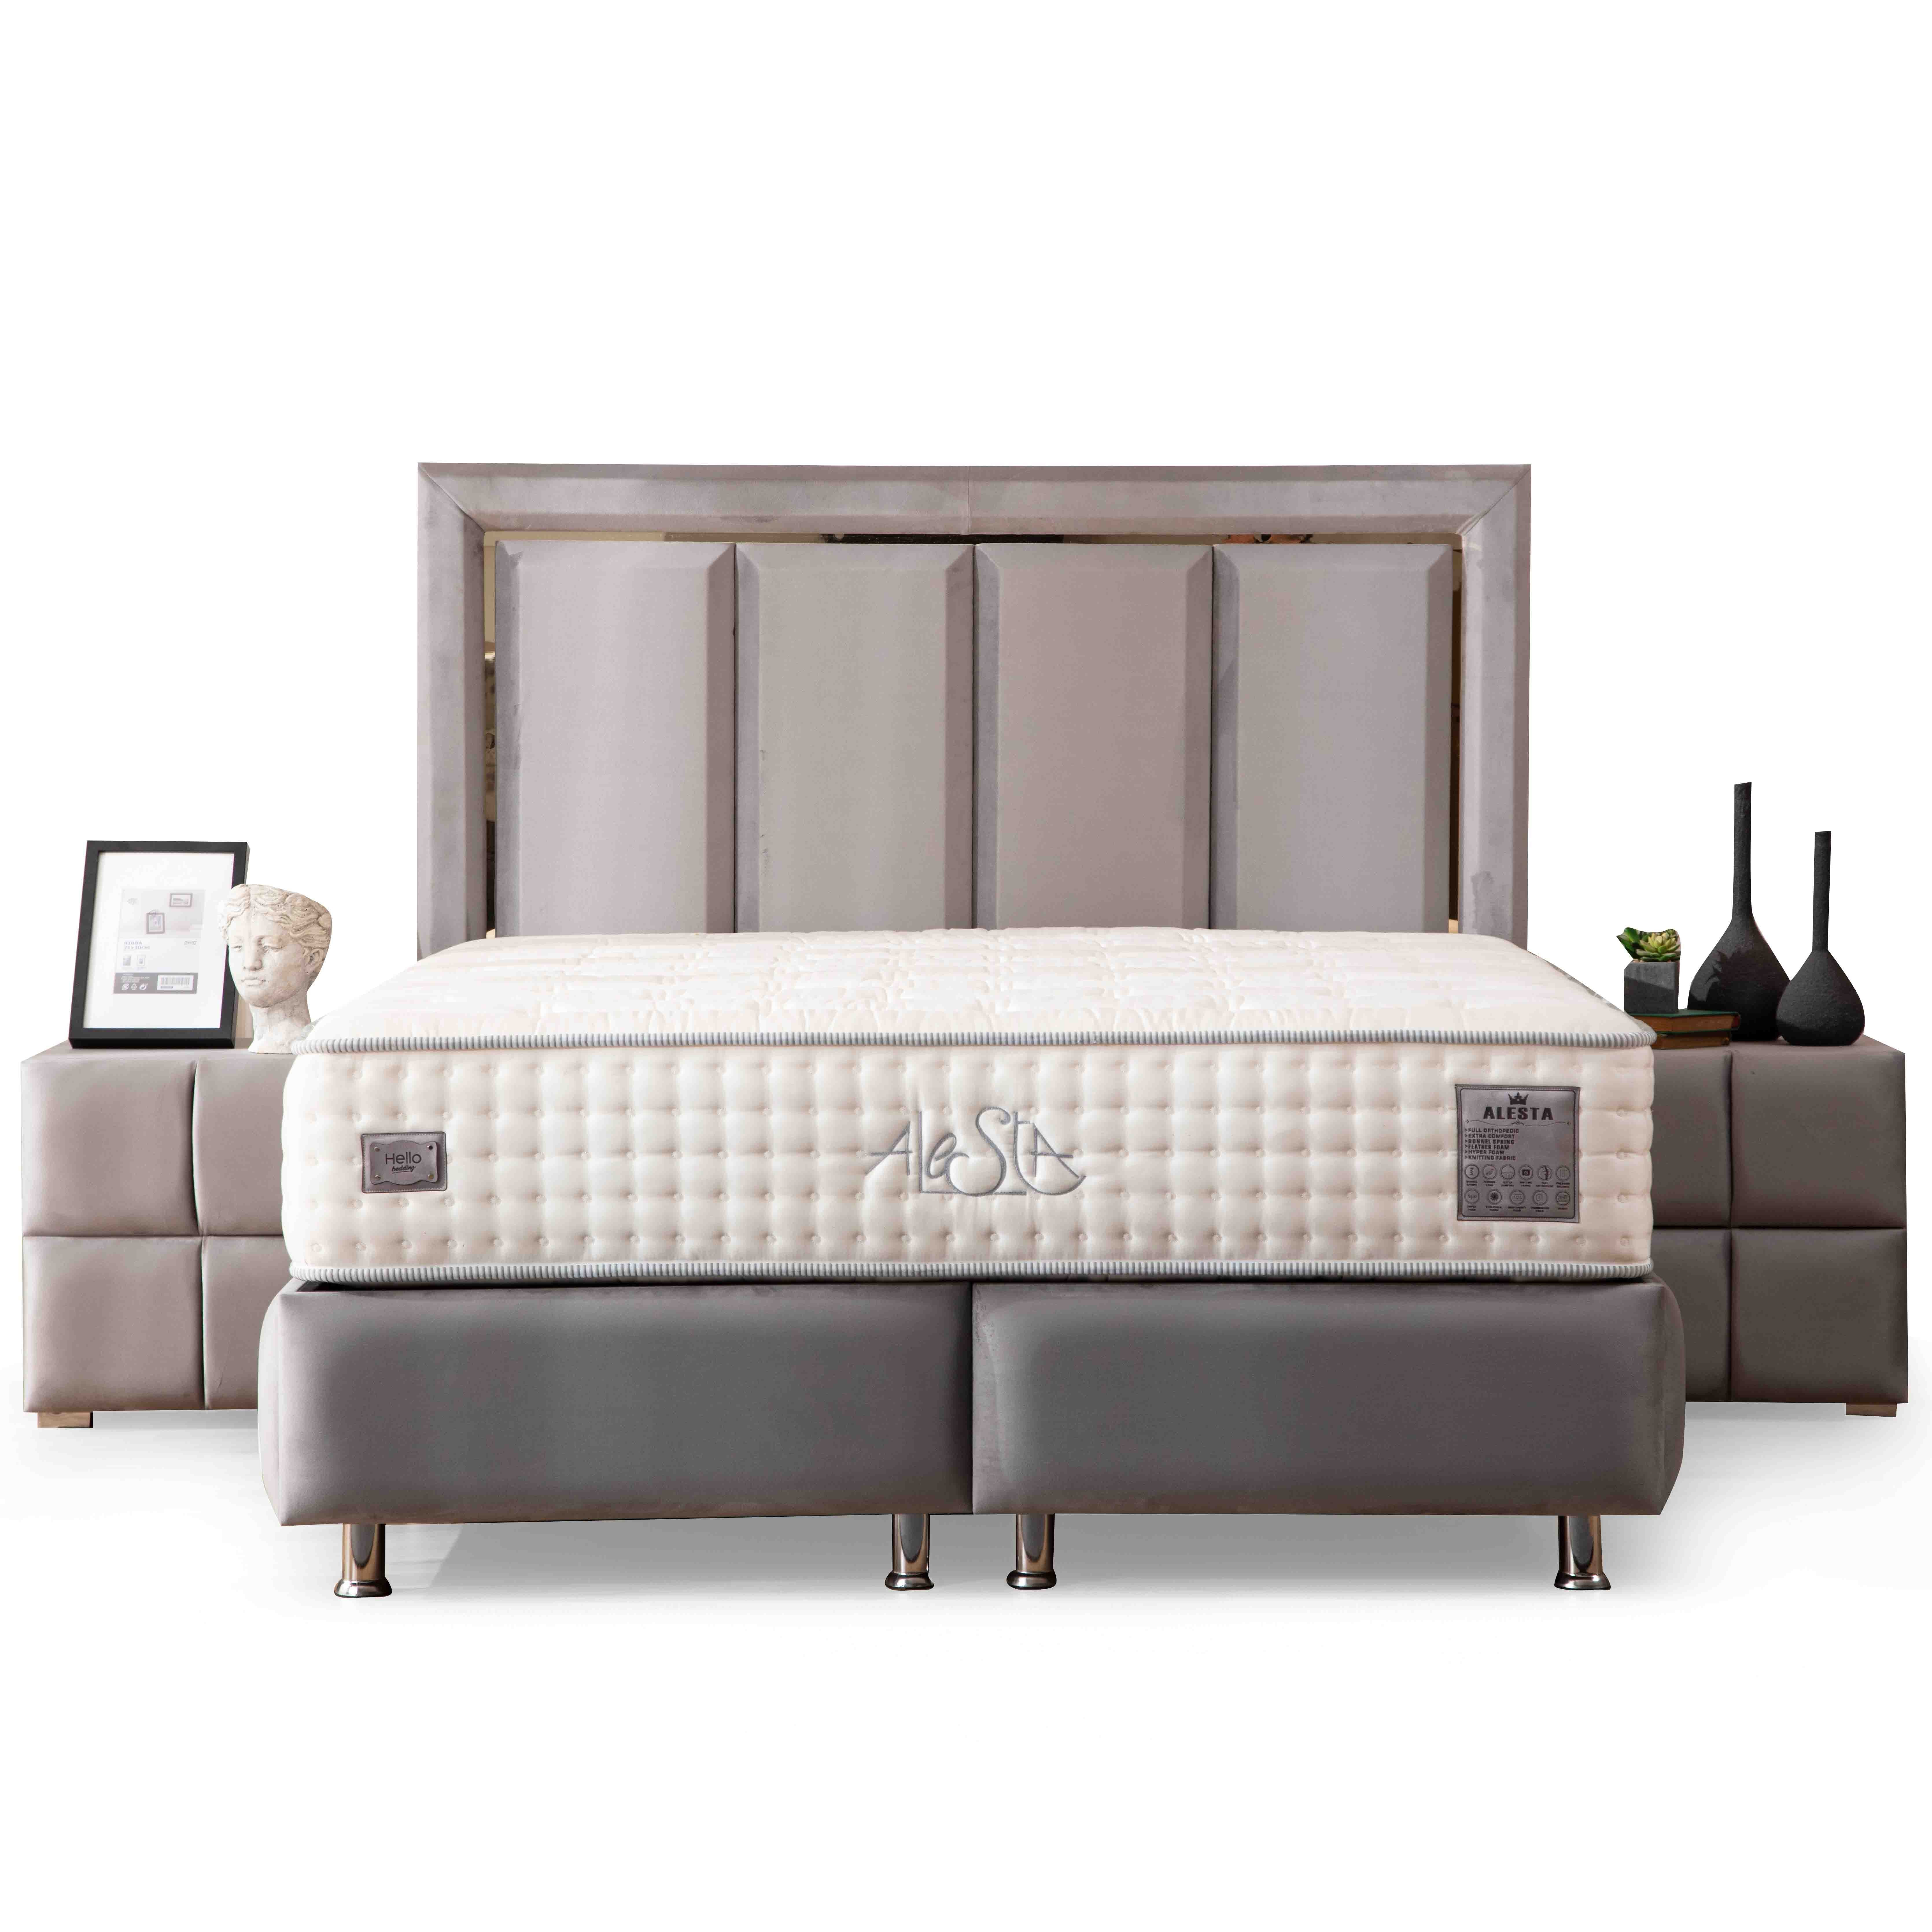 Bergama Bed With Storage 180*200